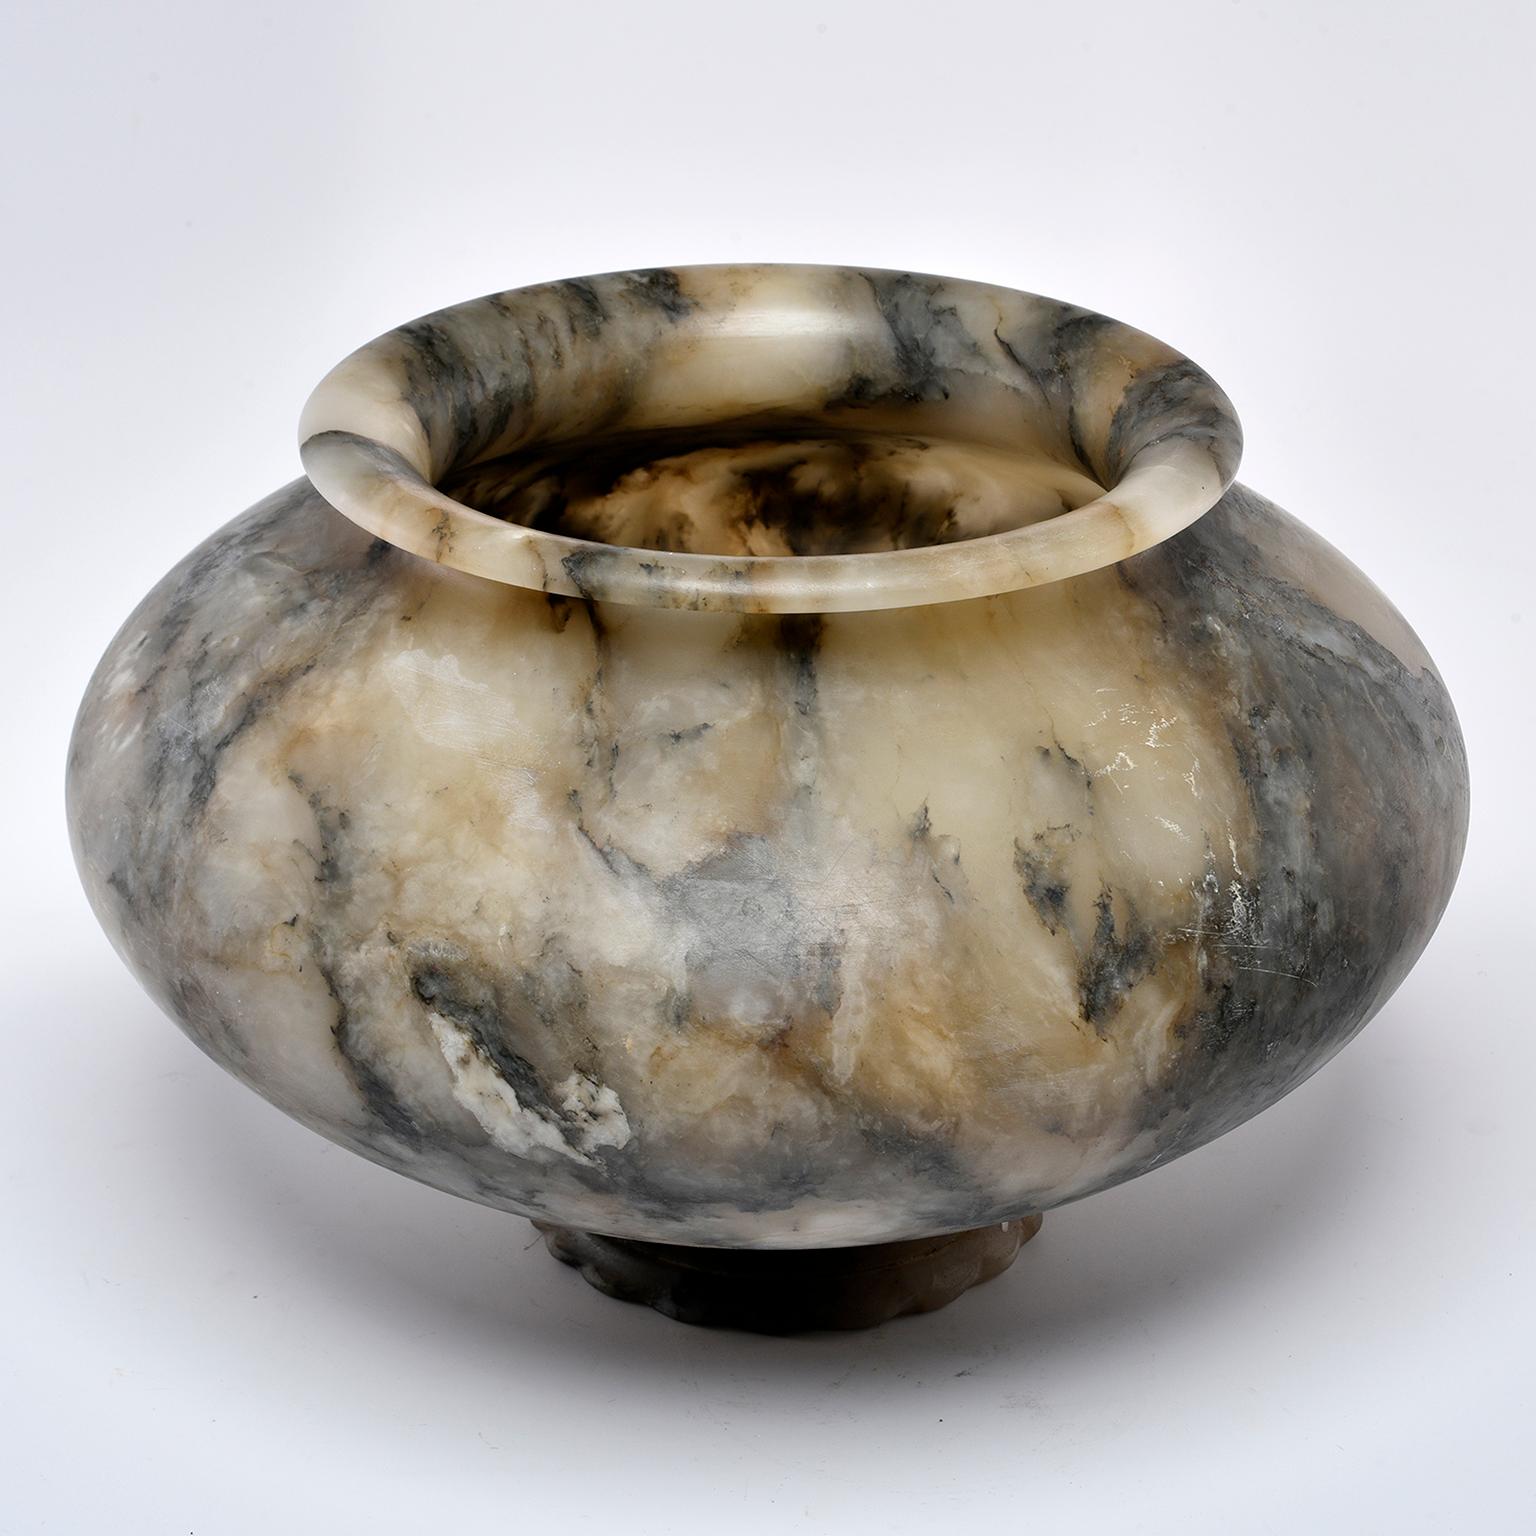 New and custom made for us in Italy, this marble bowl has a diameter of just under 12